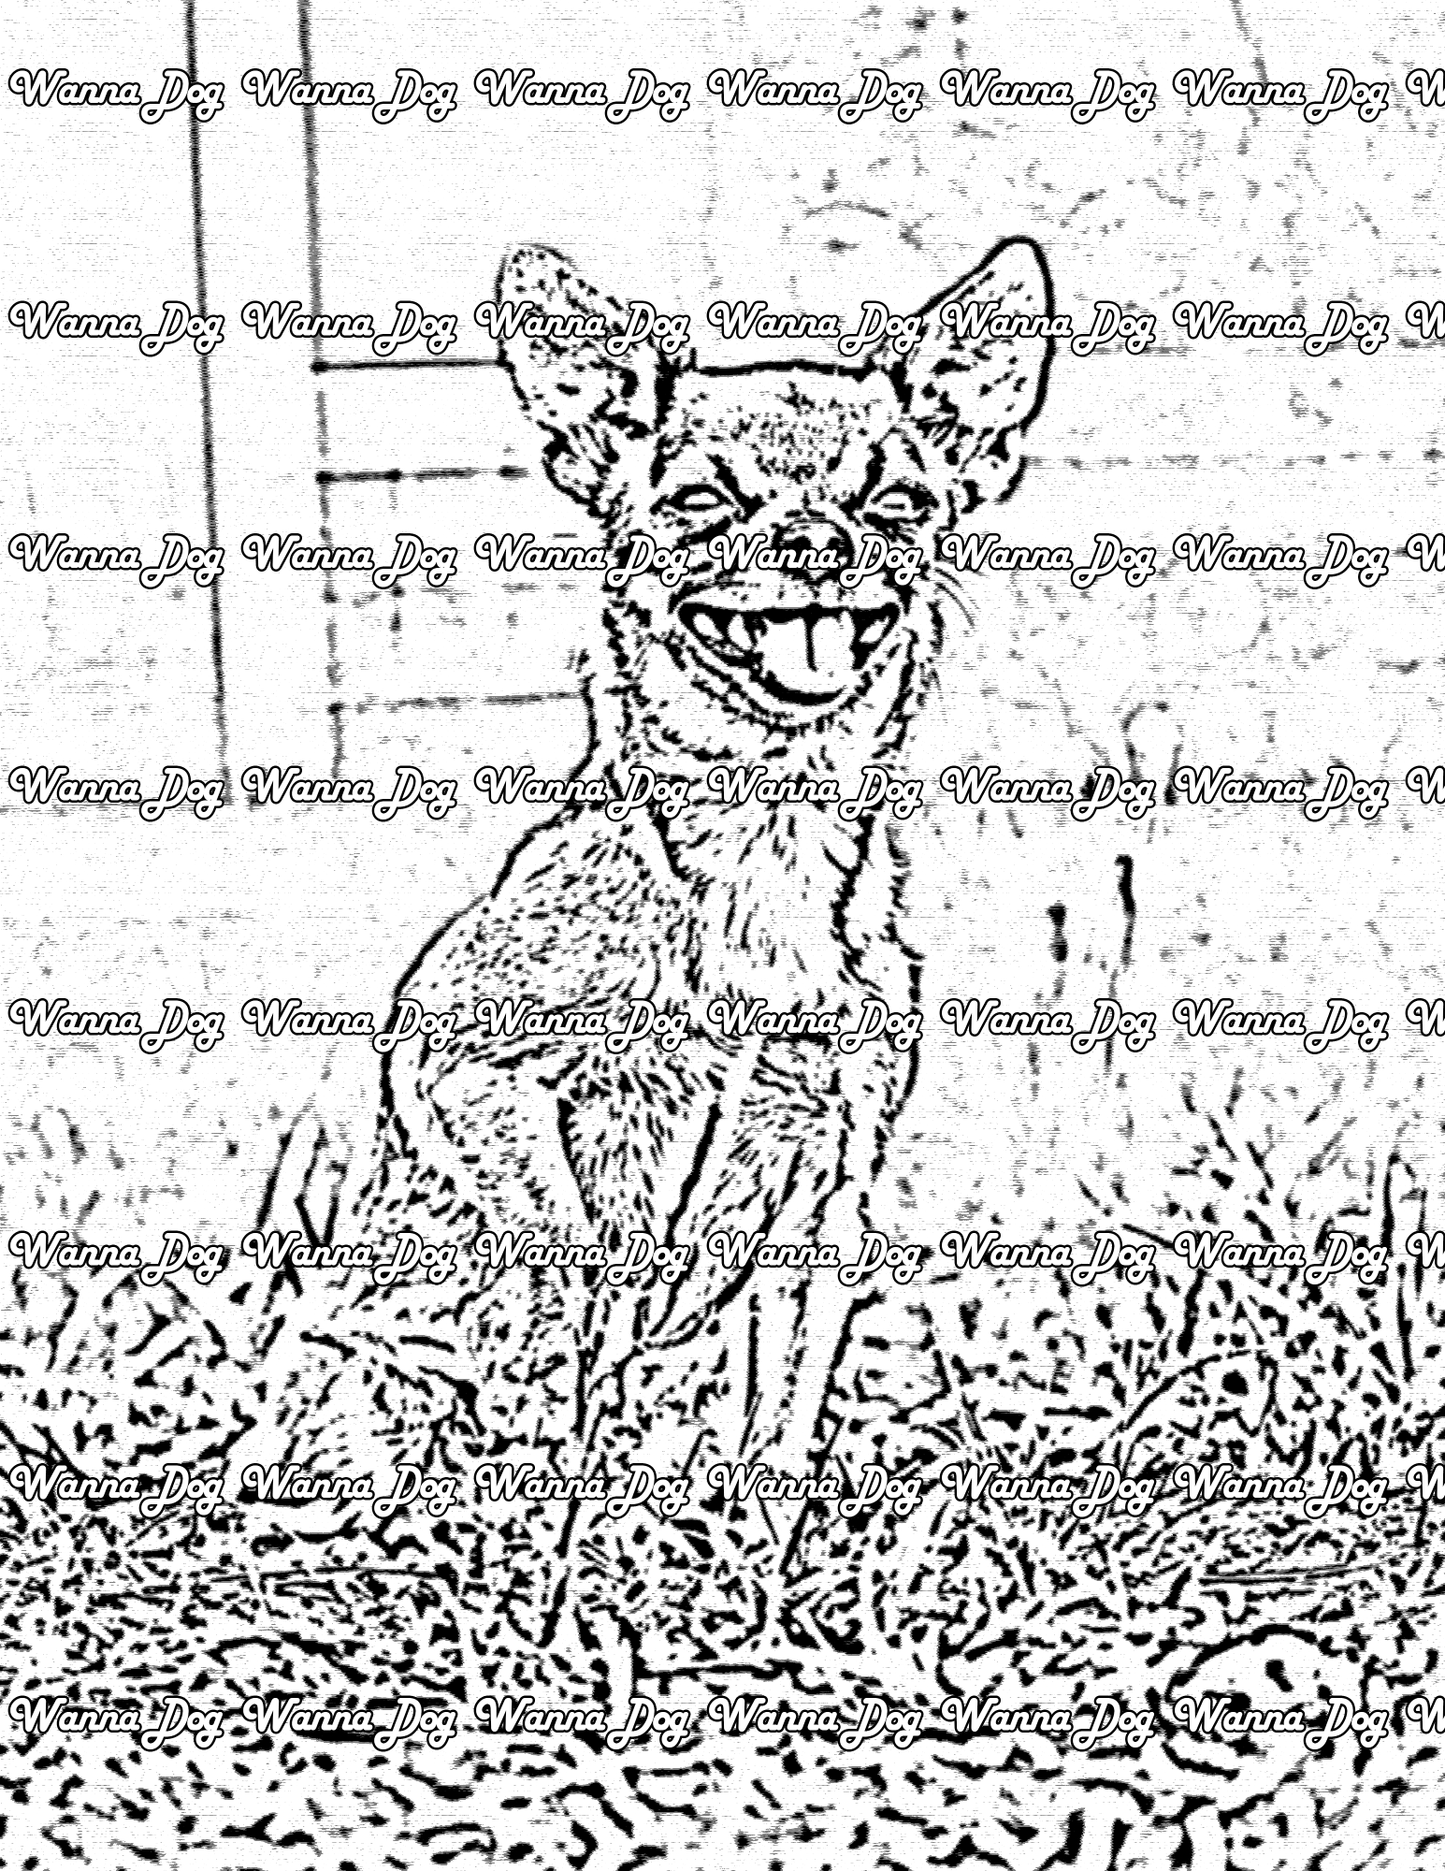 Chihuahua Coloring Page of a Chihuahua posing with their tongue out